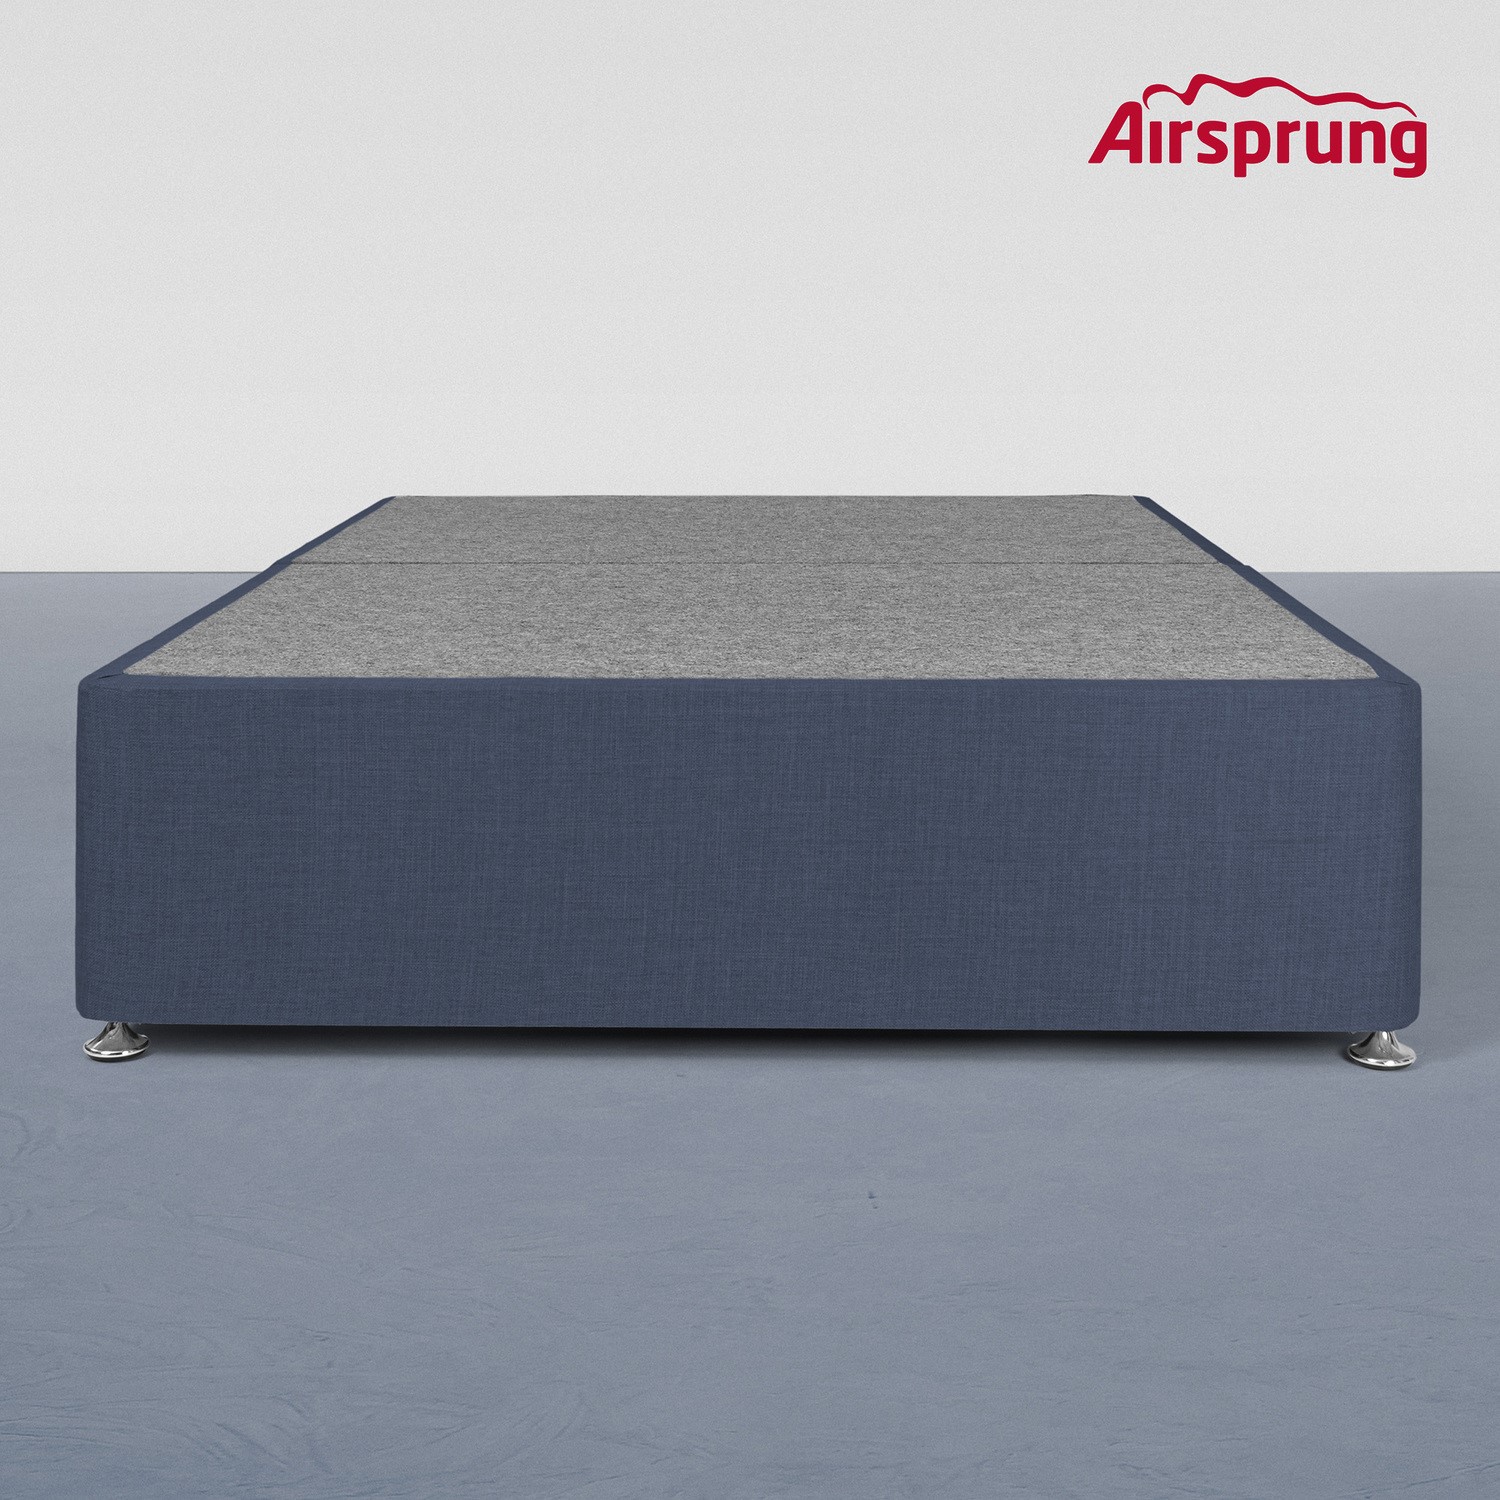 Read more about Airsprung kelston double divan midnight blue